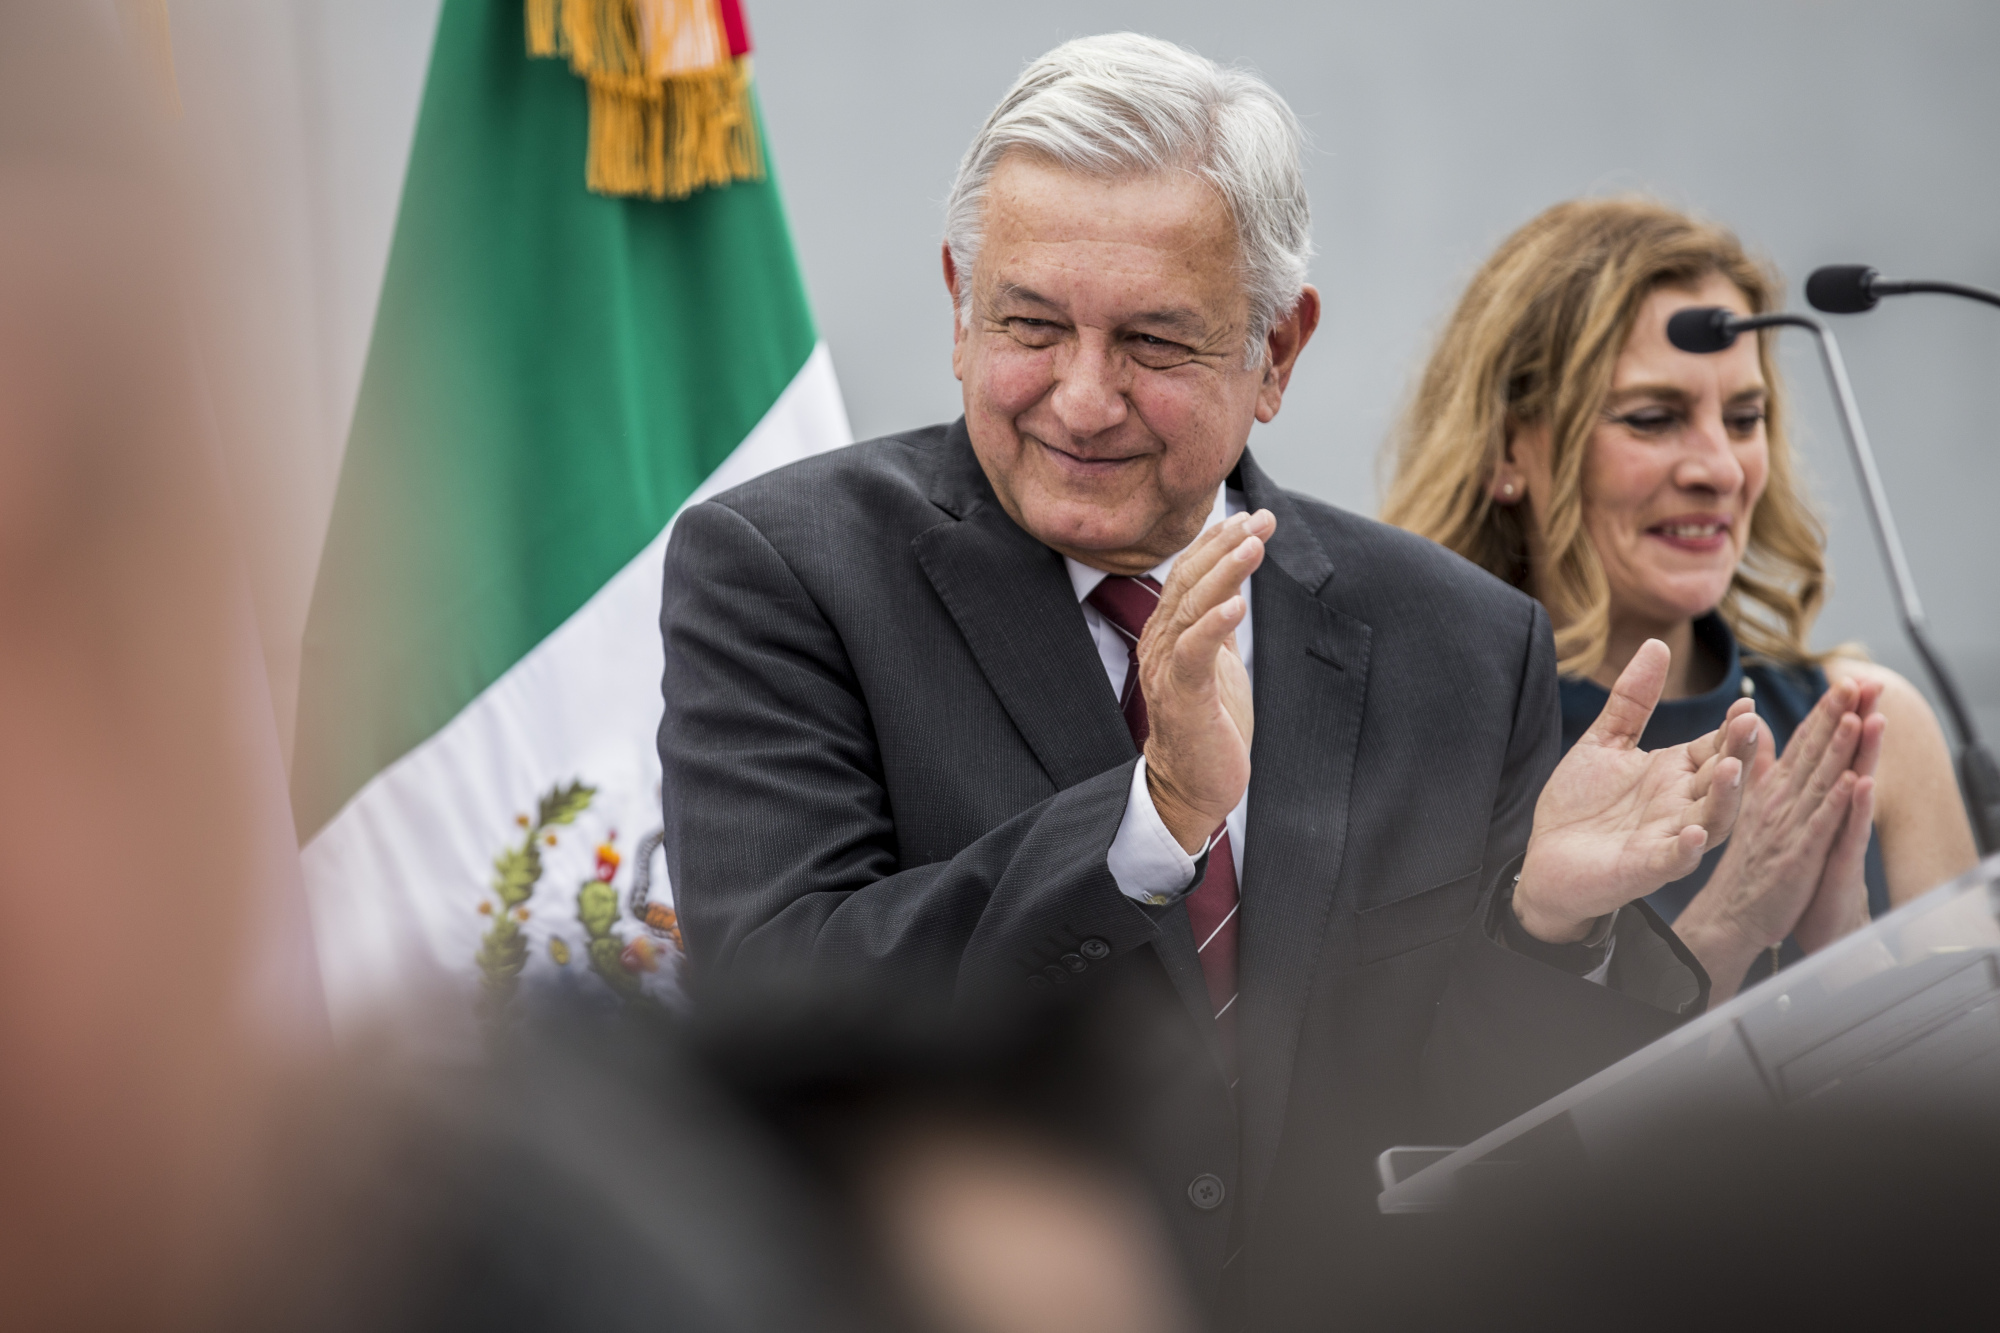 Andres Manuel Lopez Obrador, presidential candidate of the National Regeneration Movement Party (MORENA), smiles during a campaign rally&nbsp;in Mexico City, Mexico, on March 16.